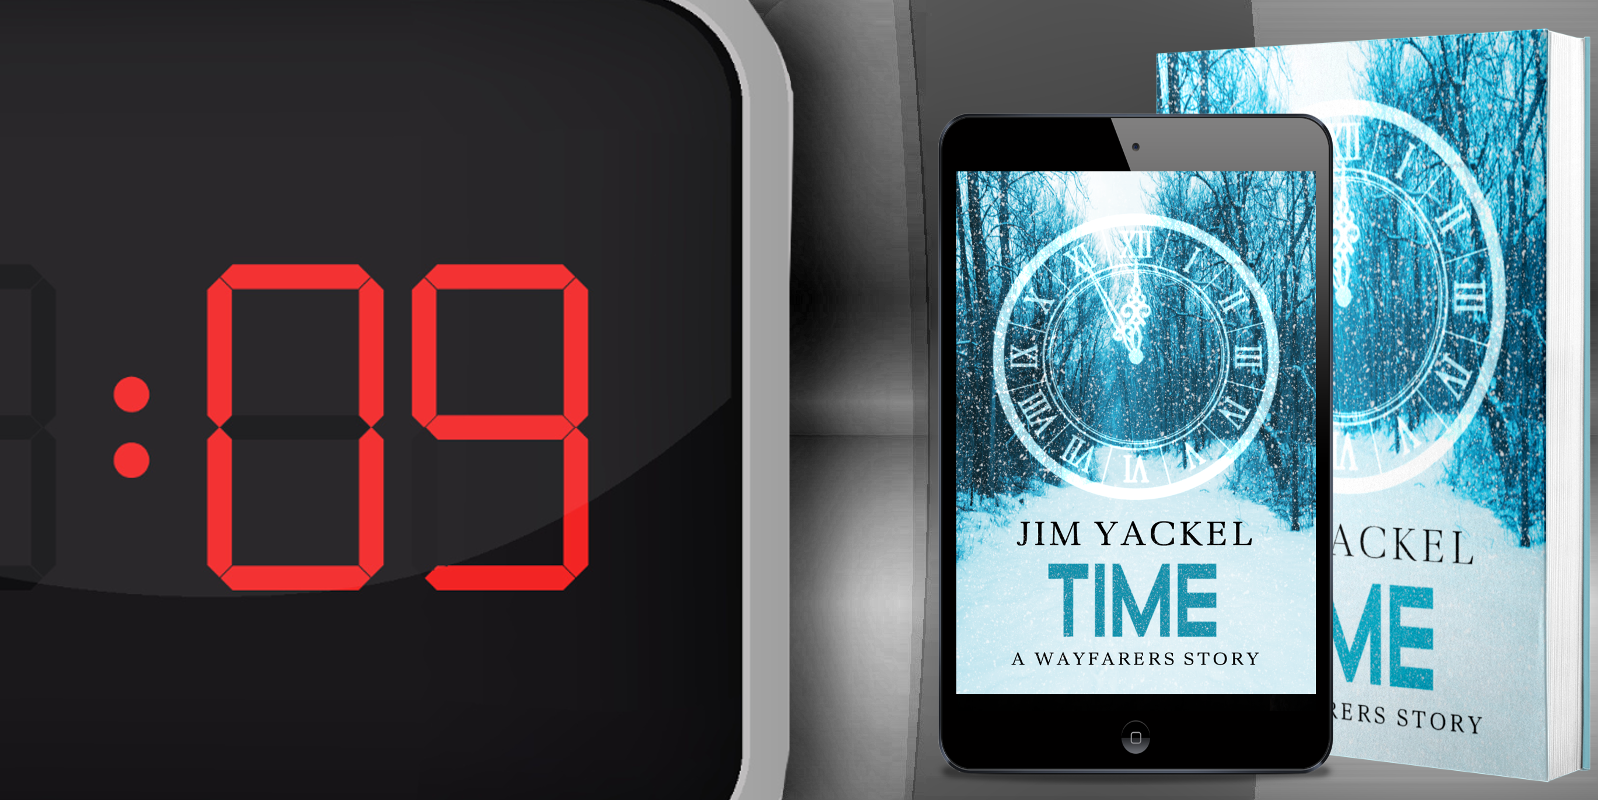 Who would blow Sarah's house up, and why? Read Time: A Wayfarers Story in Kindle and paperback